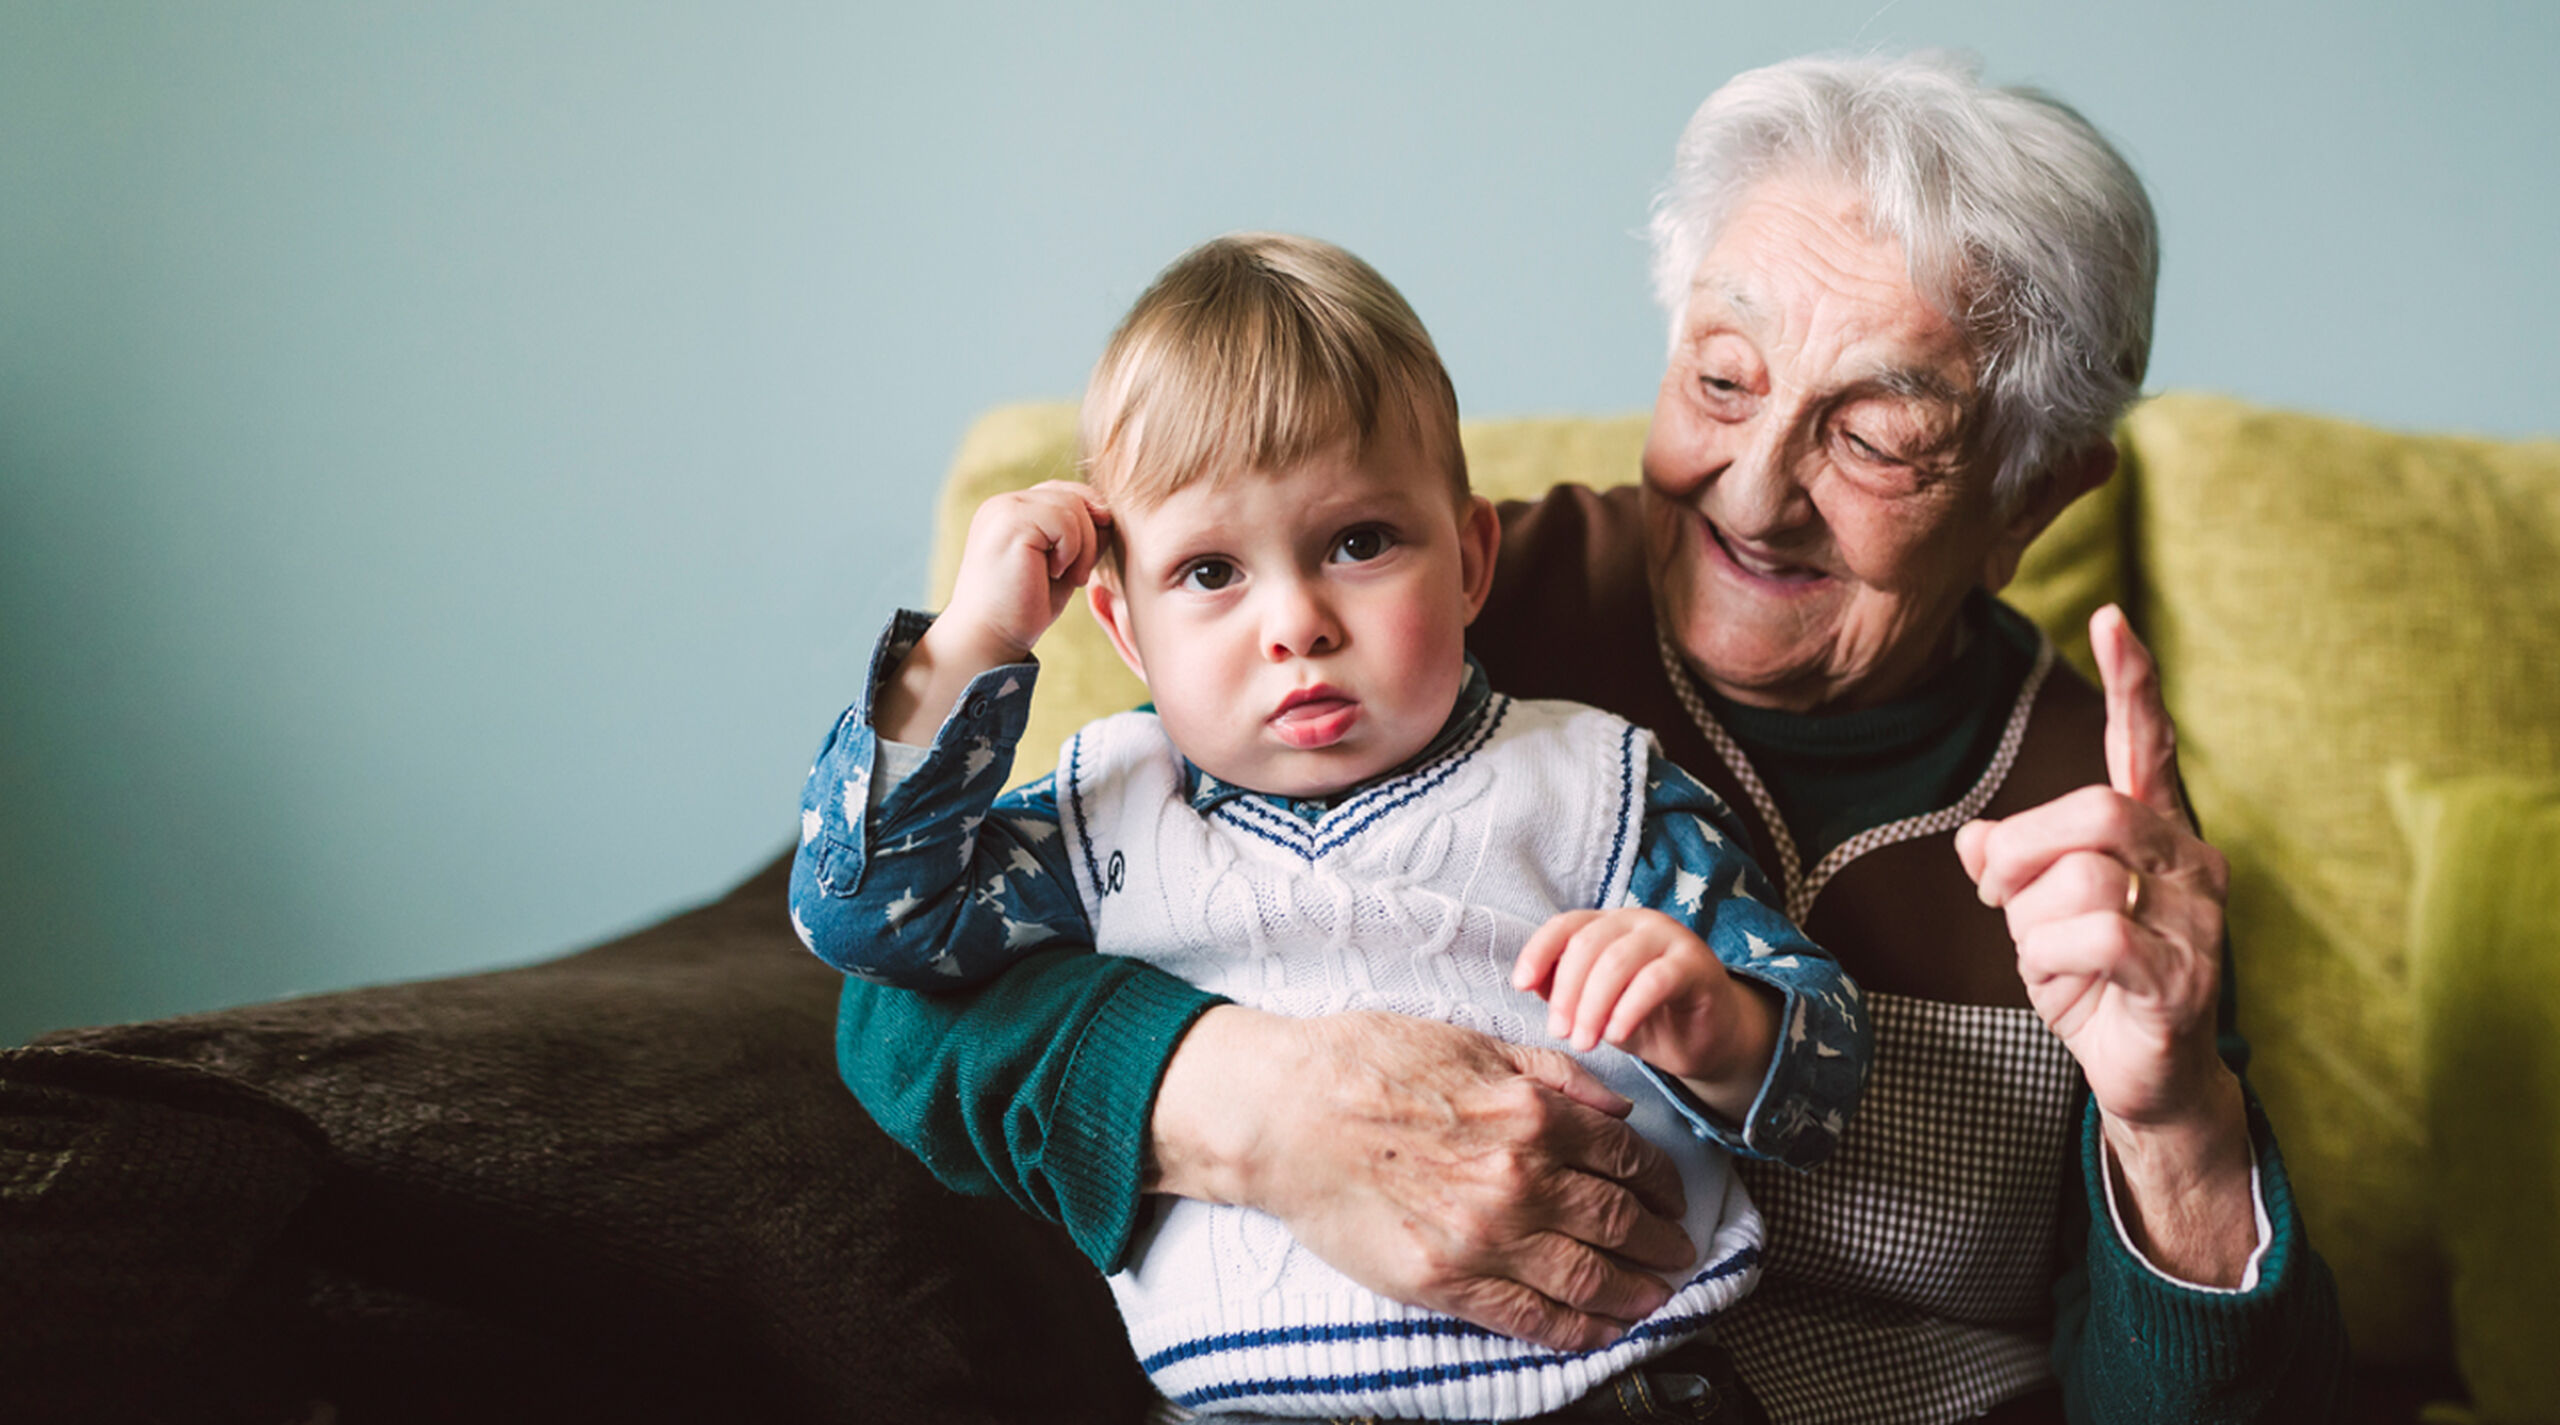 aged care resident enjoying time with grandson in nursing home